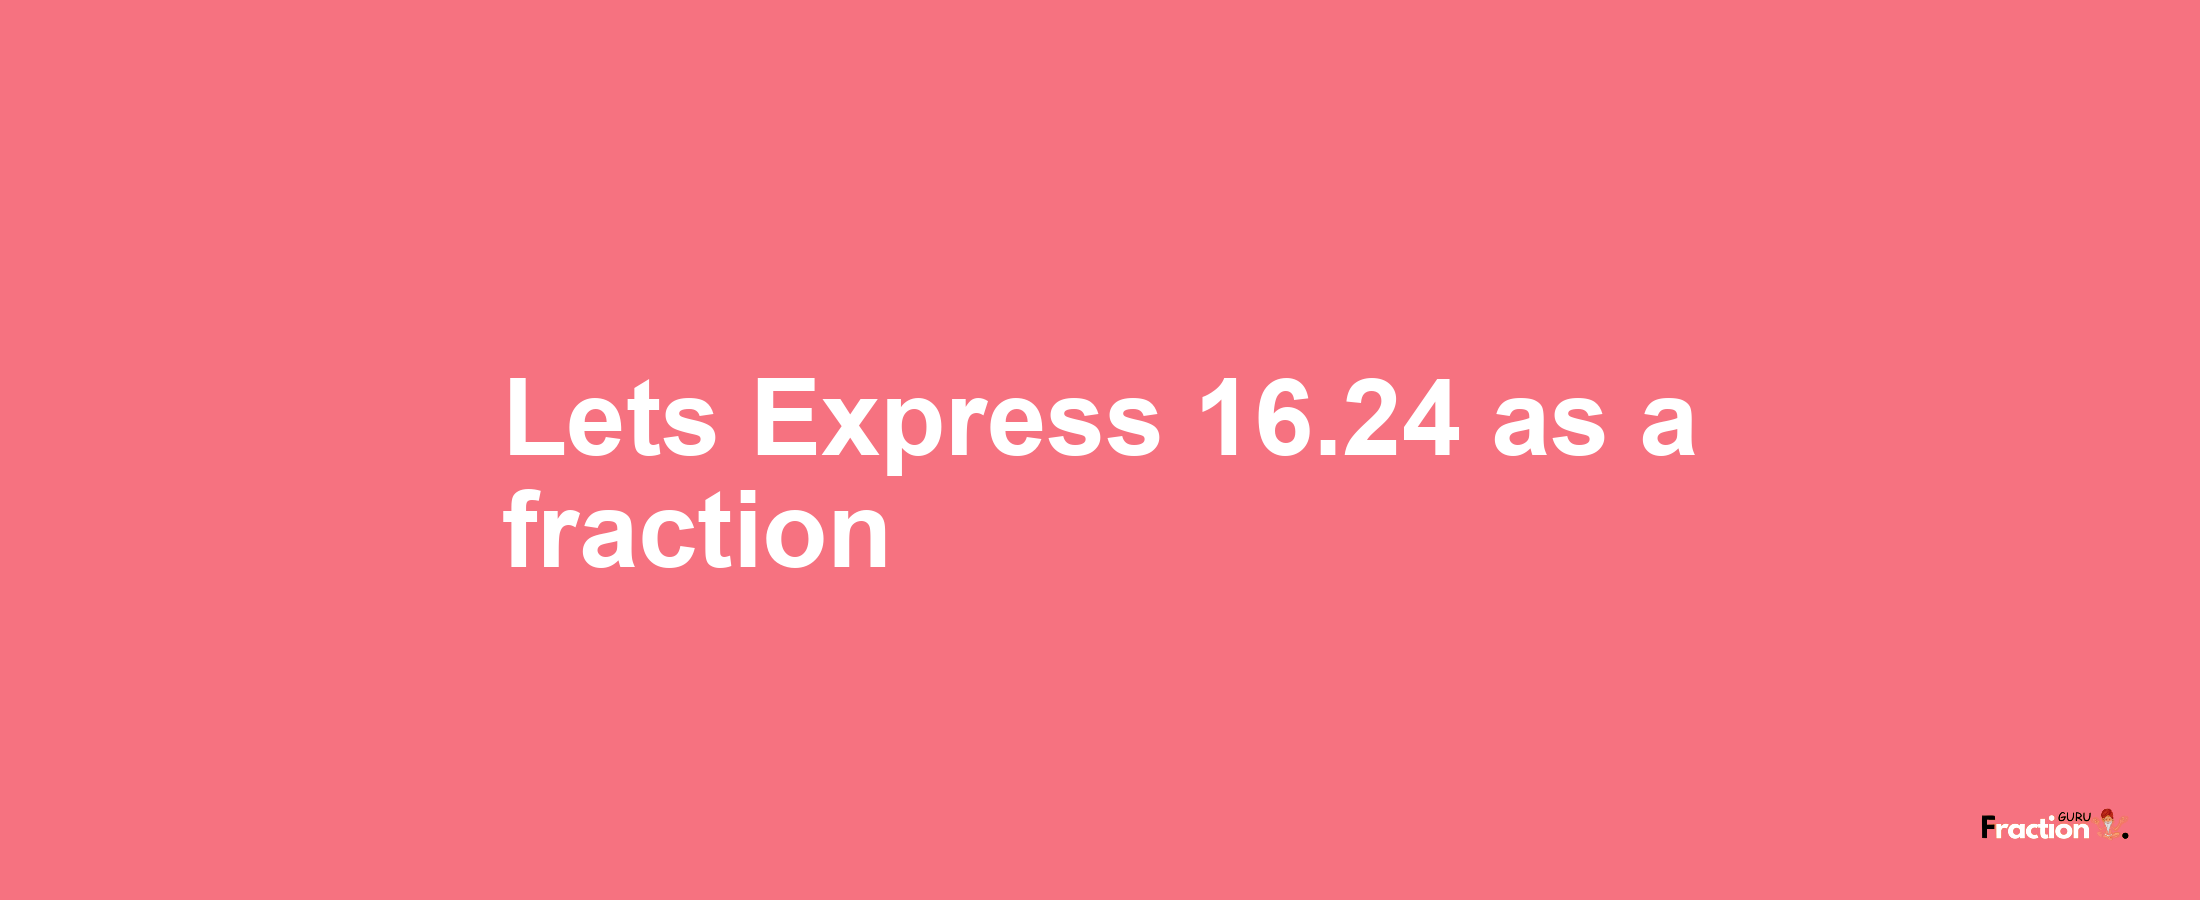 Lets Express 16.24 as afraction